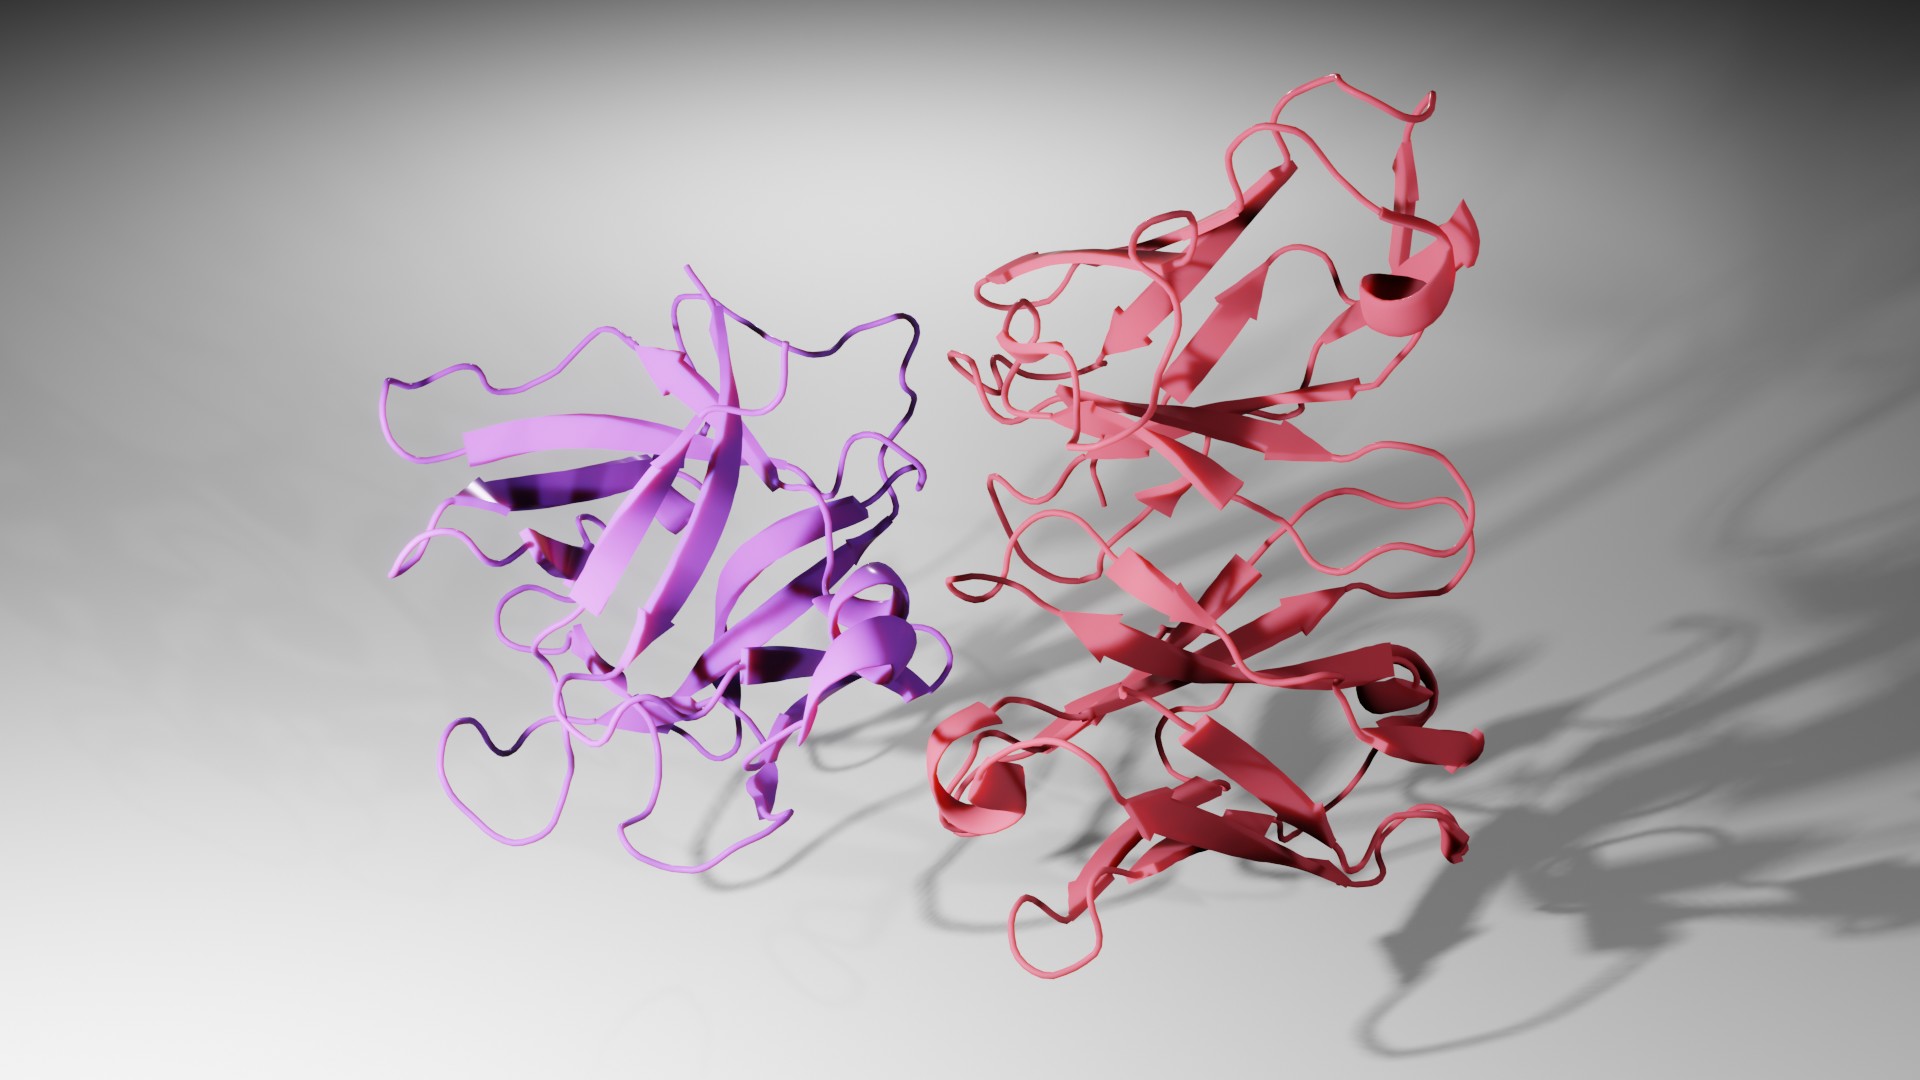 a three-dimensional illustration of a crystal structure of a protein-protein interaction between a purple and a red protein